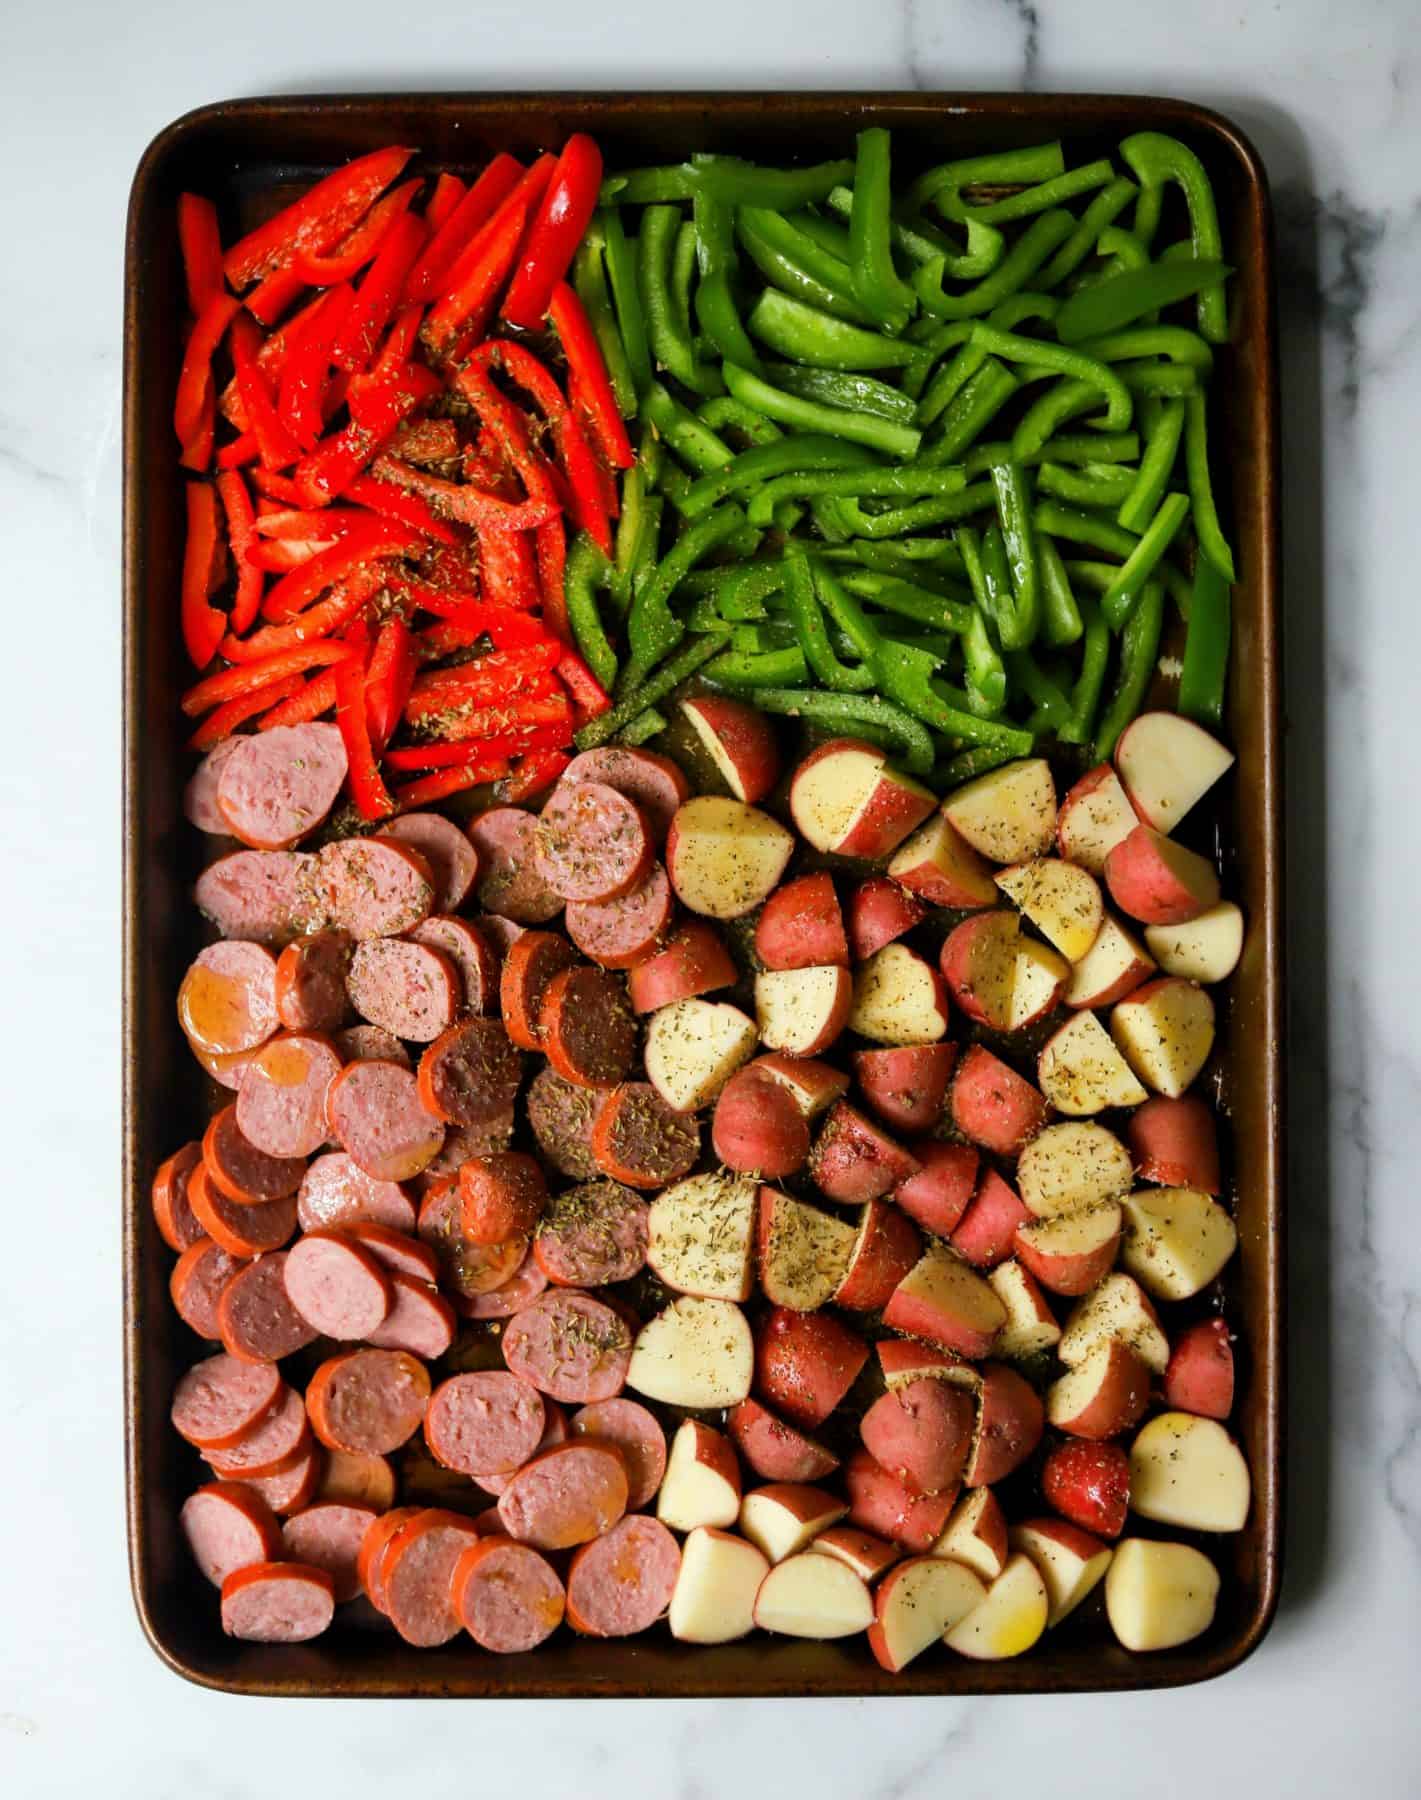 Sausage, potatoes and bell peppers on a sheet pan